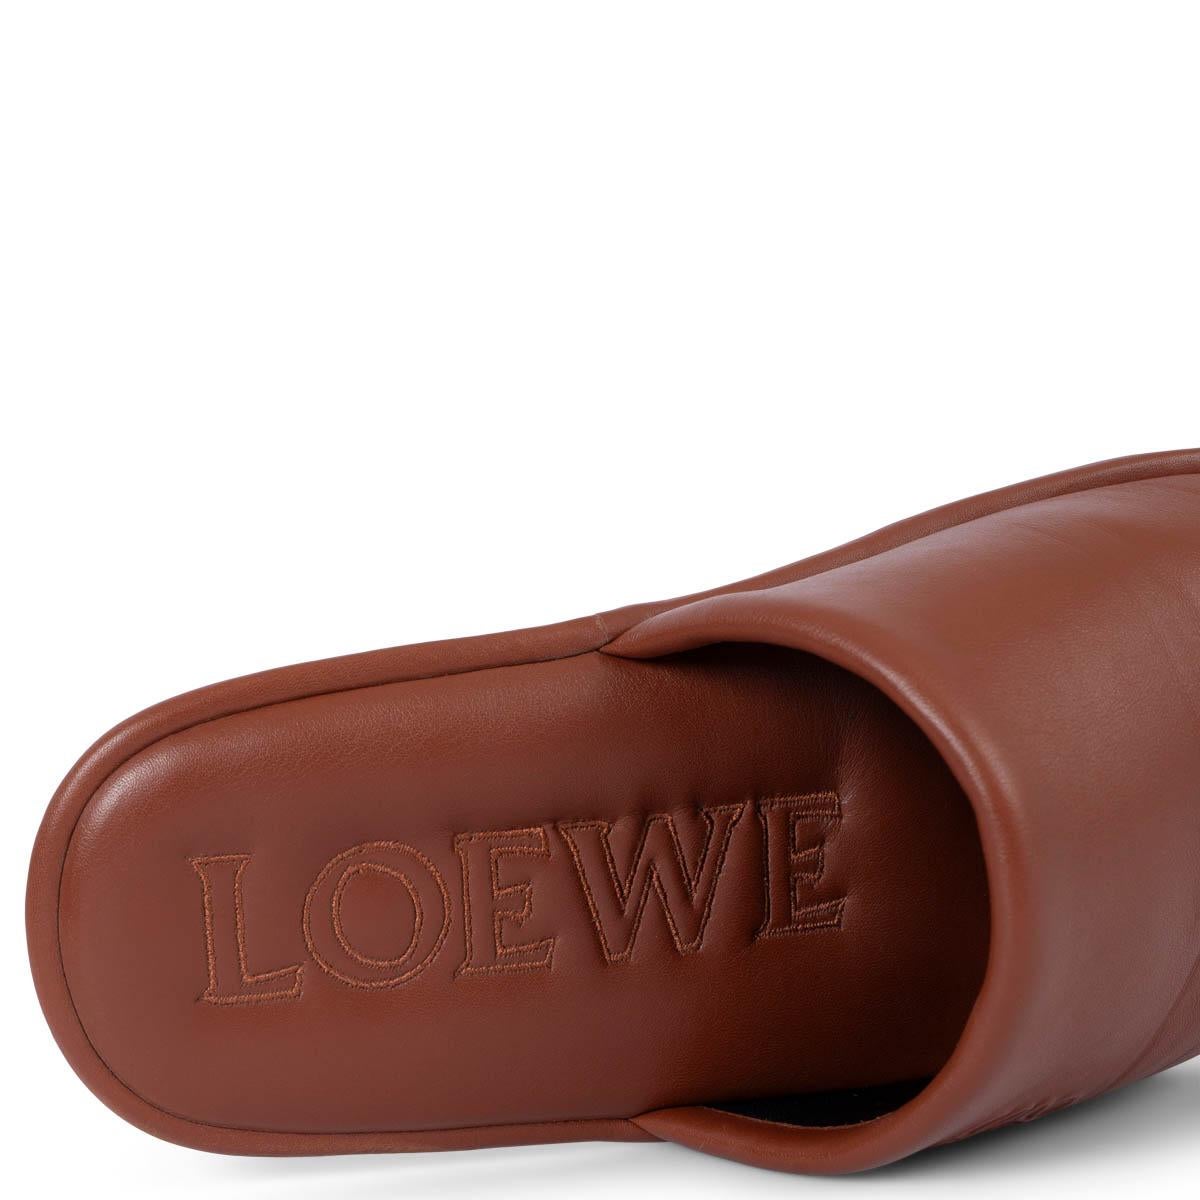 LOEWE cognac leather LOGO EMBOSSED SLIPPERS Flats Shoes 39 fit 38.5 For Sale 3